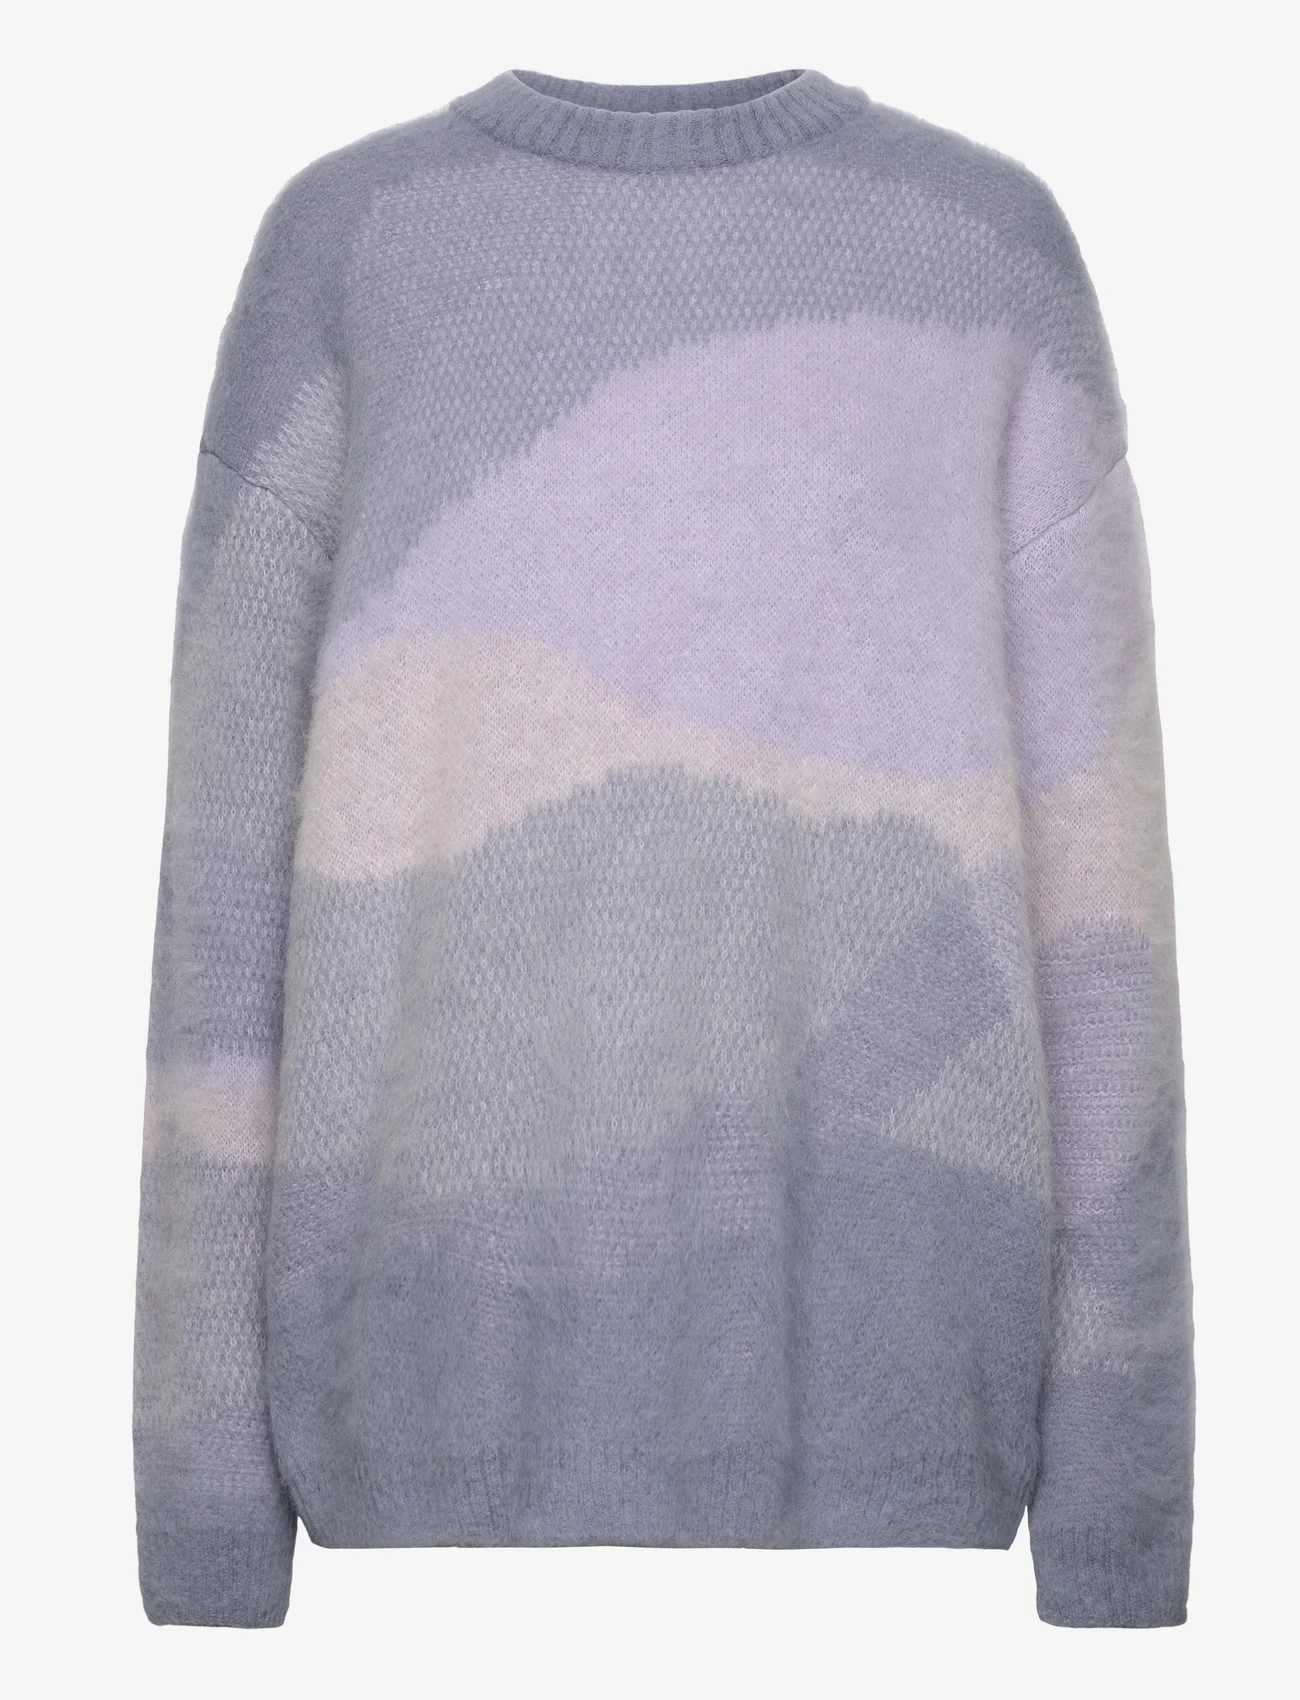 RODEBJER - Rodebjer Eclipse - pullover - lilac - 0